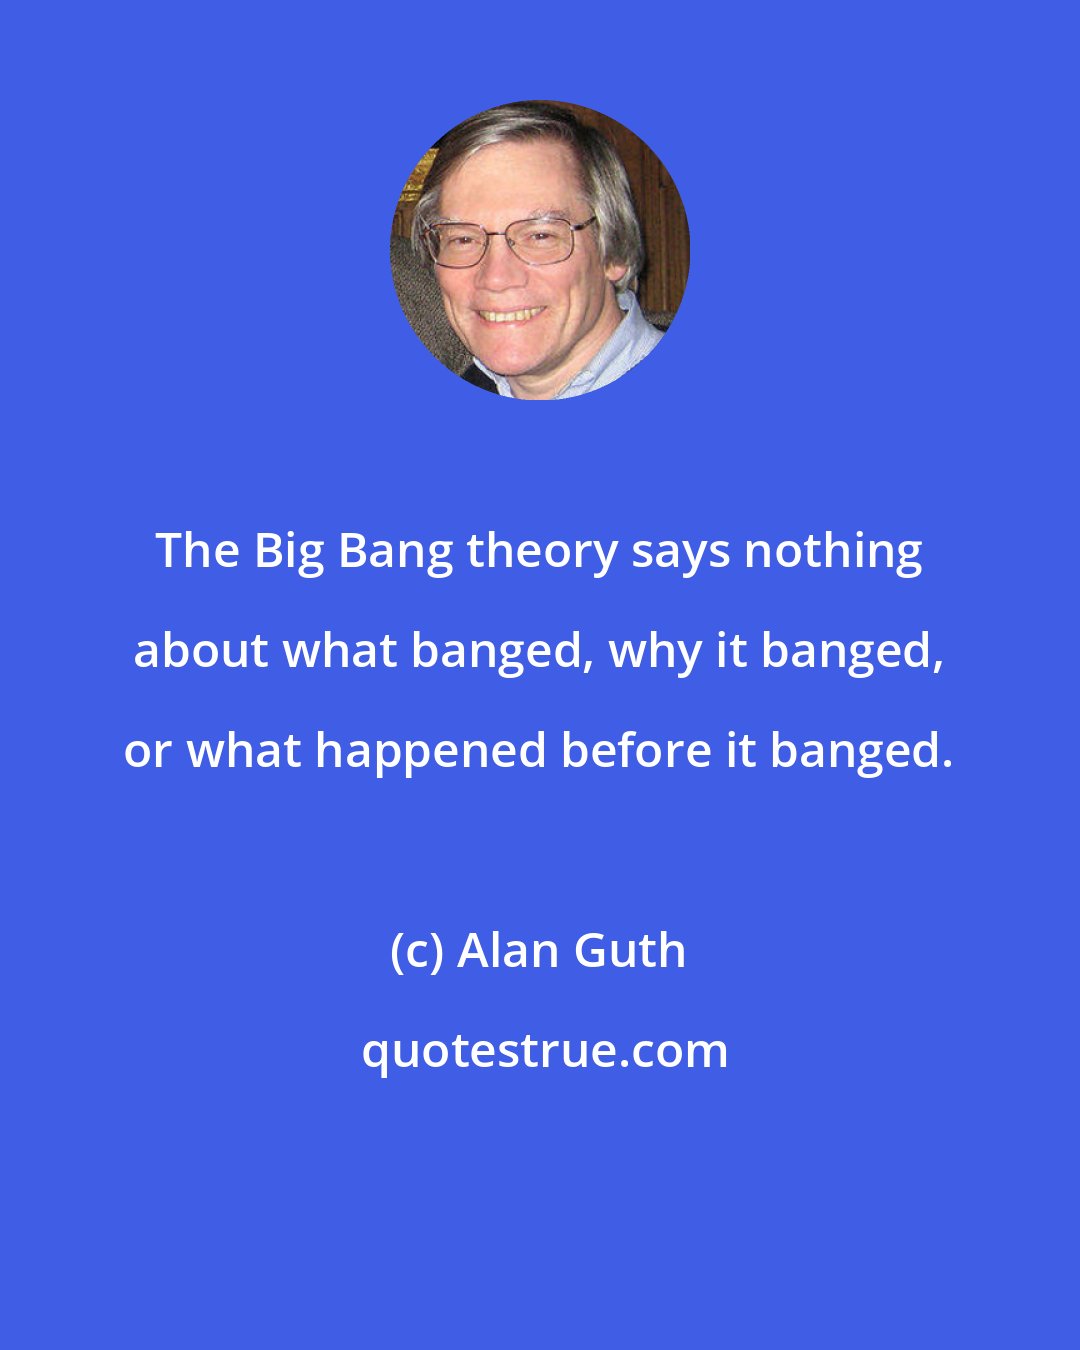 Alan Guth: The Big Bang theory says nothing about what banged, why it banged, or what happened before it banged.